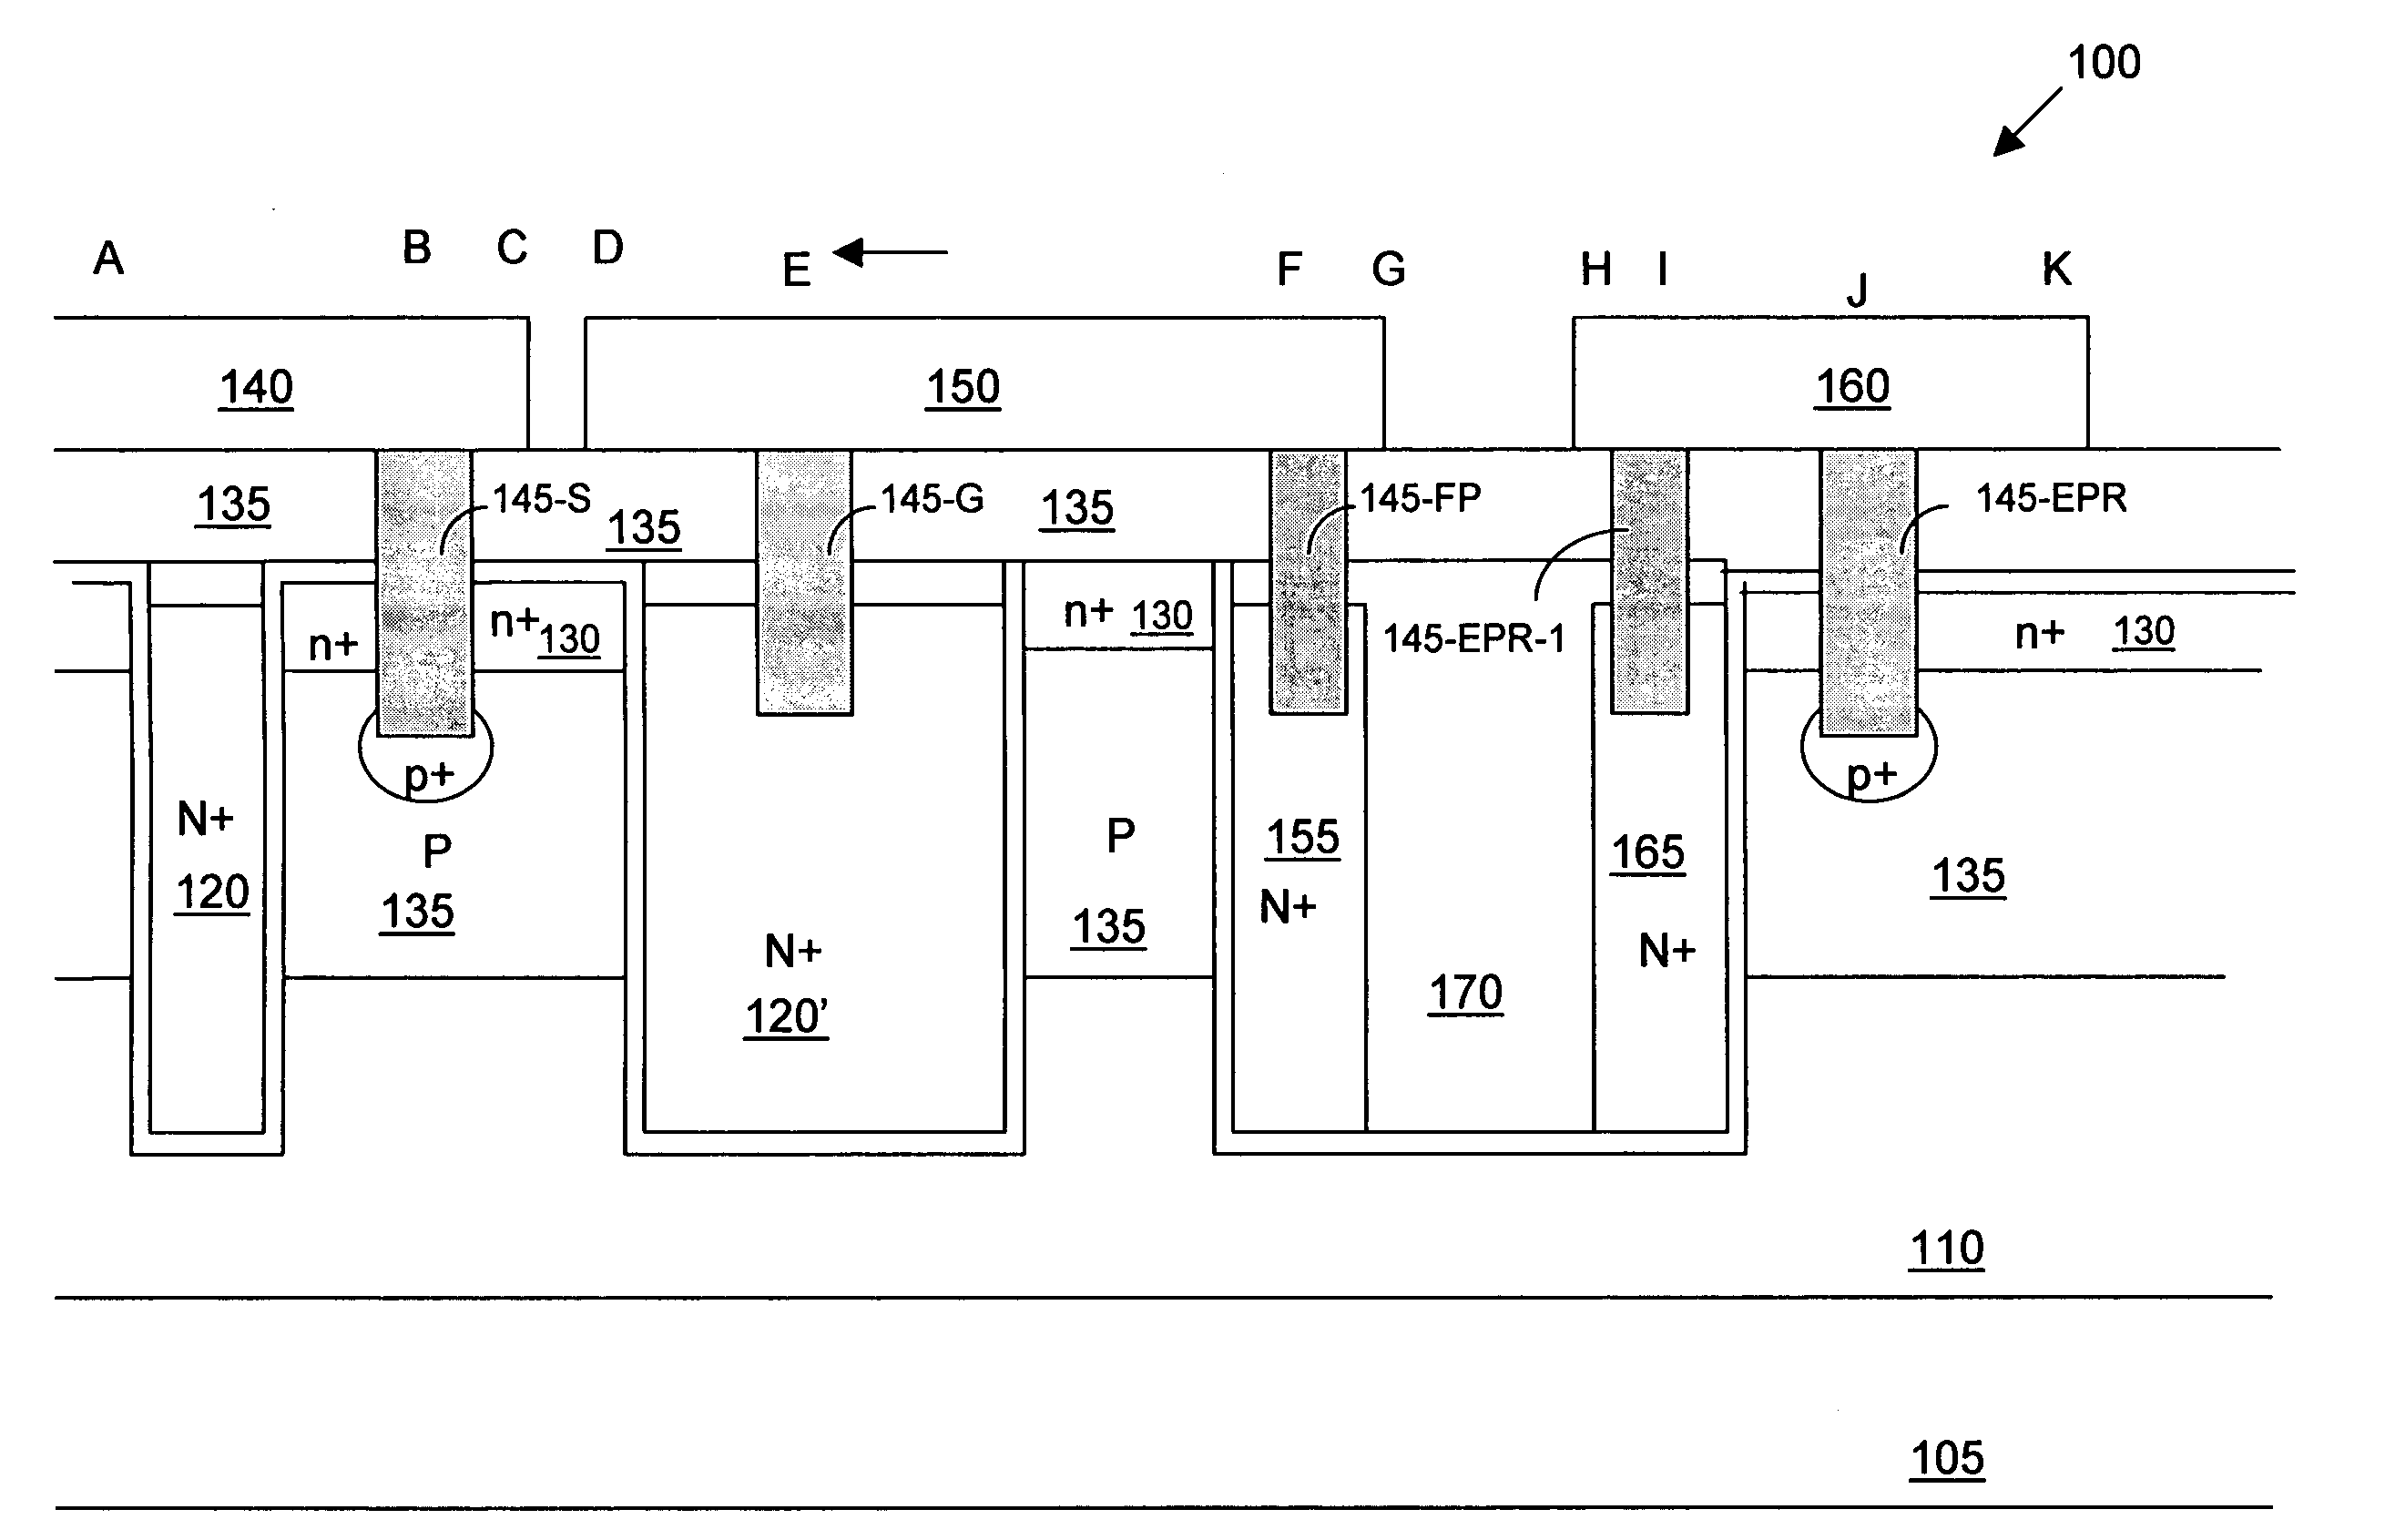 Trenched mosfet device configuration with reduced mask processes